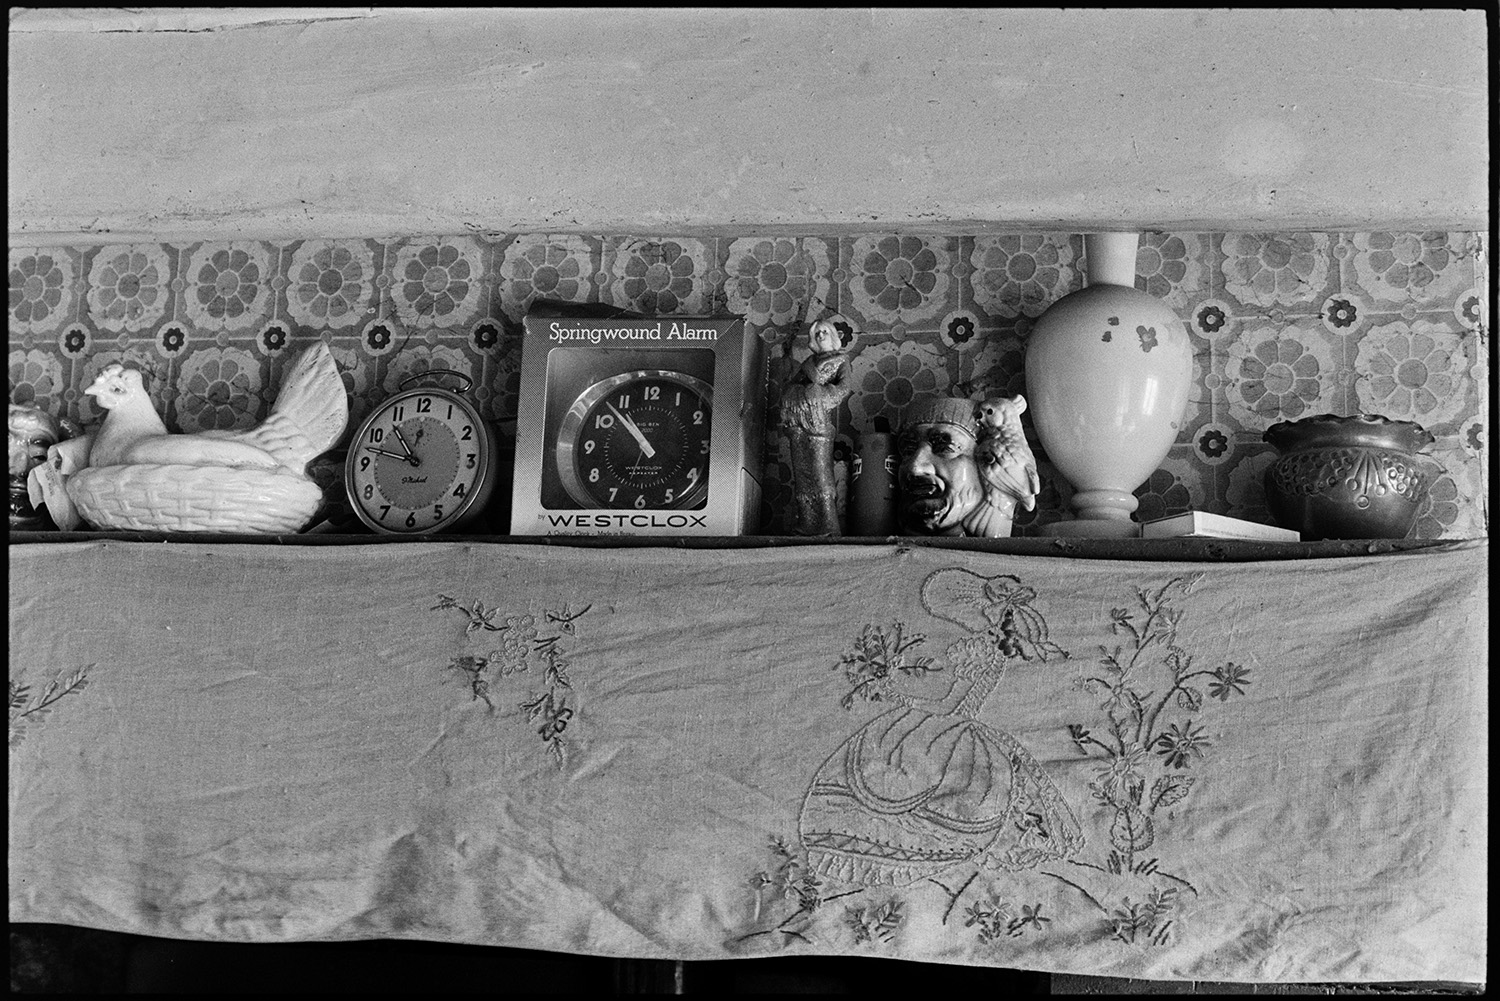 Clock and ornaments on farmhouse mantelpiece, embroidered cloth.
[Clocks, a vase and ornaments on a mantelpiece trimmed with a hand embroidered cloth at Mount Pleasant, Beamsworthy. One of the clocks is in its packaging.]